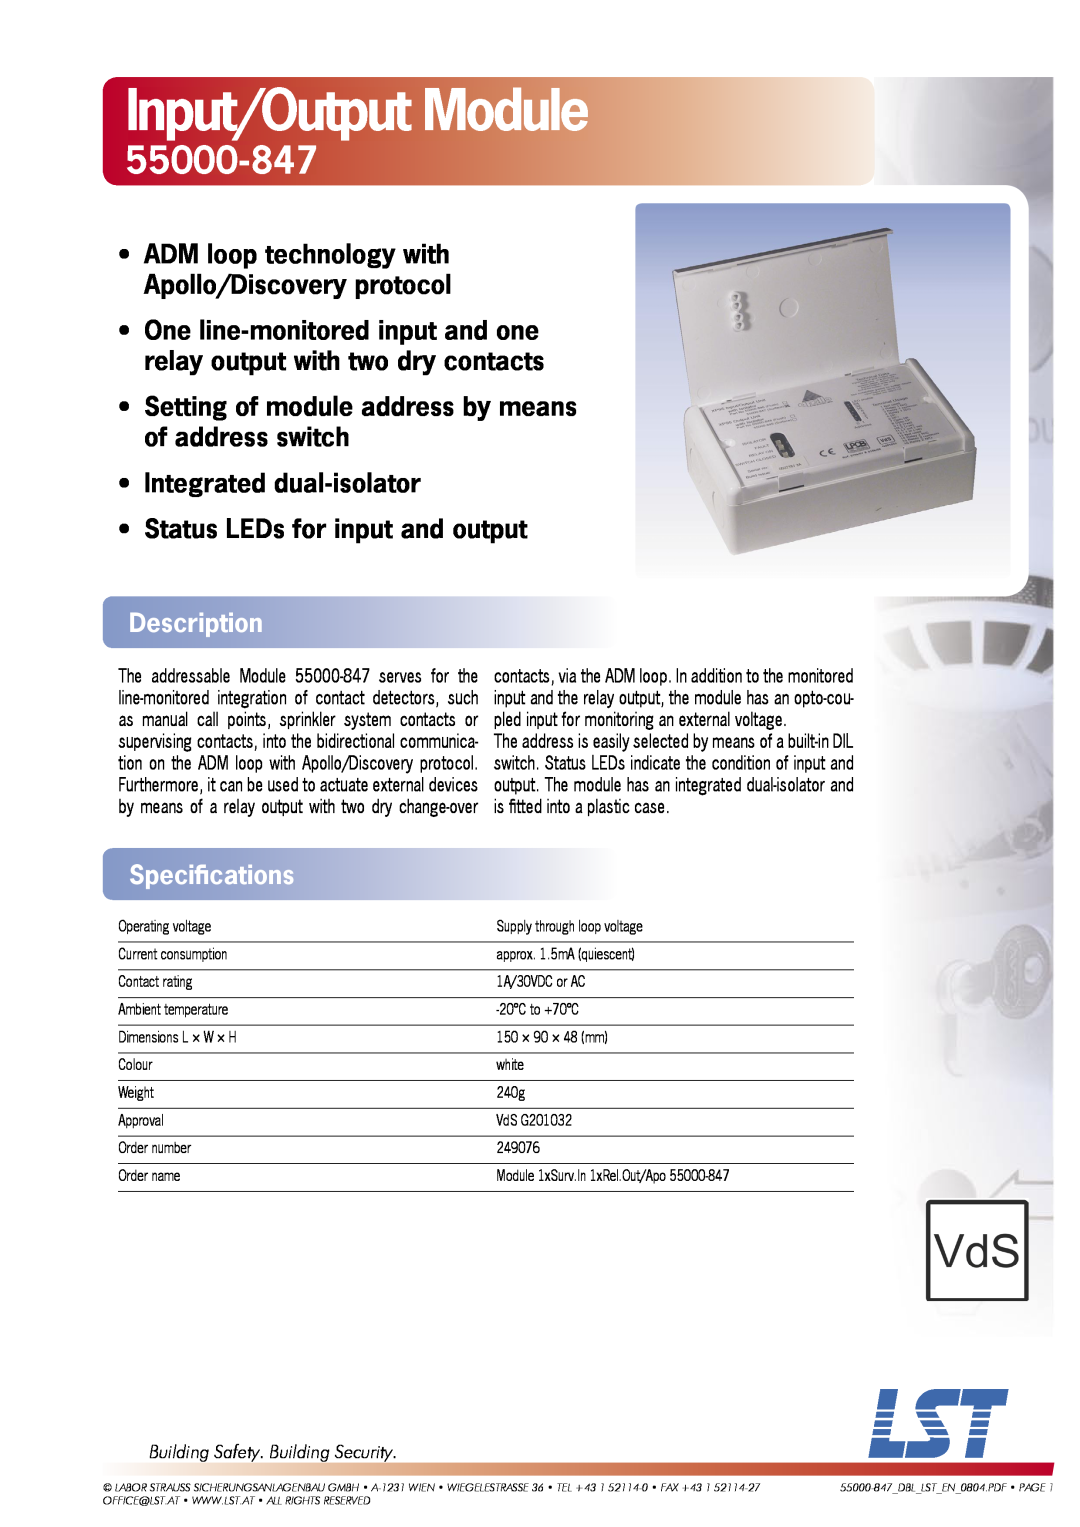 LST 55000-847 specifications Input/Output Module, Integrated dual-isolator, Status LEDs for input and output, Description 